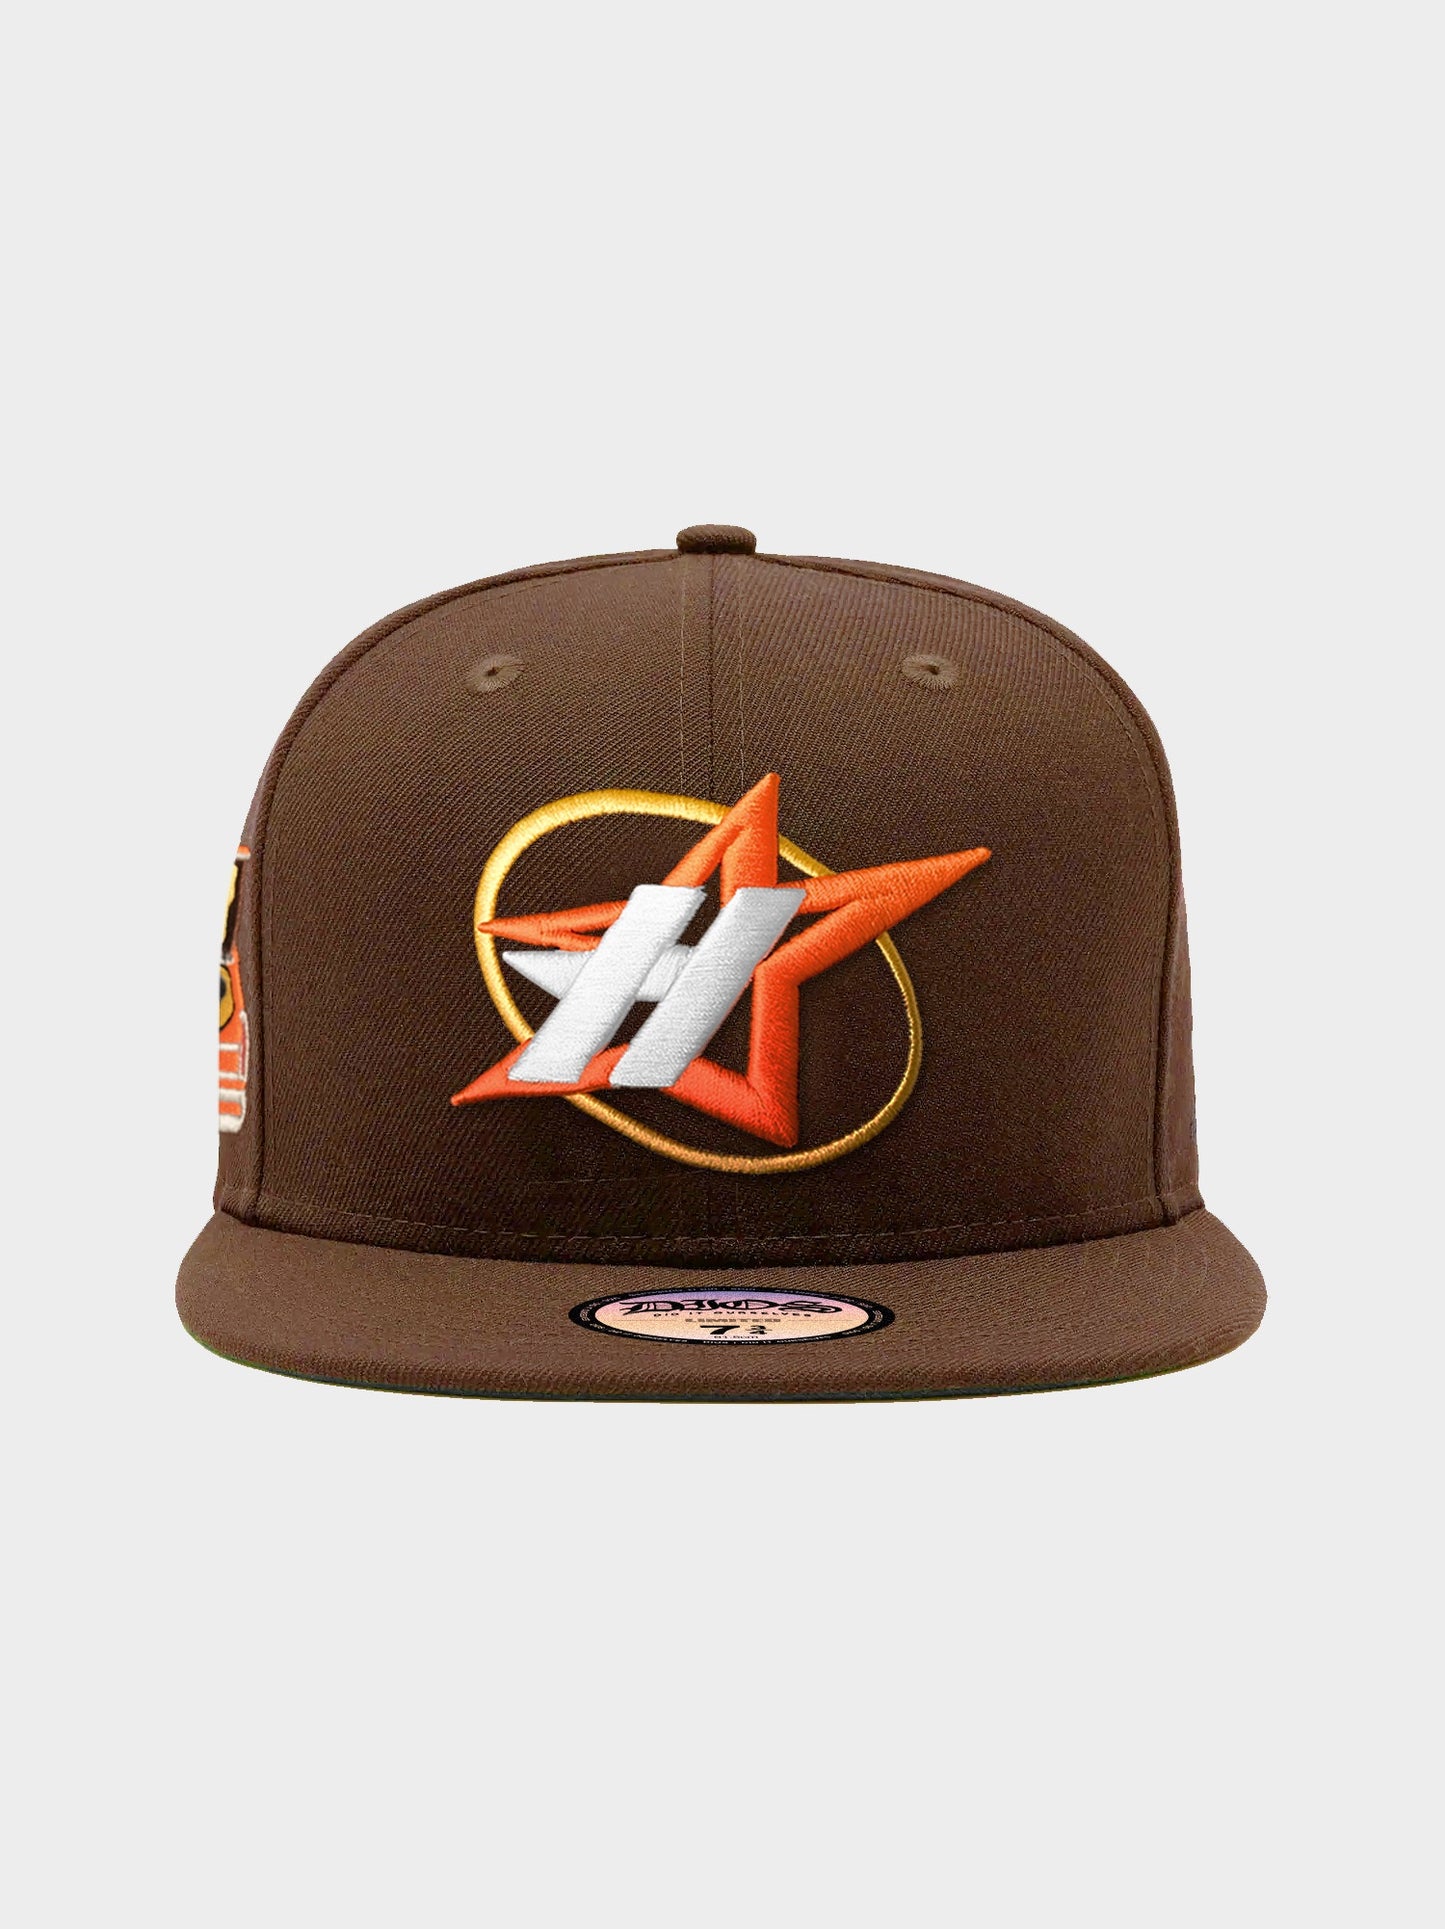 HOUSTON DIOS -  BROWN FITTED